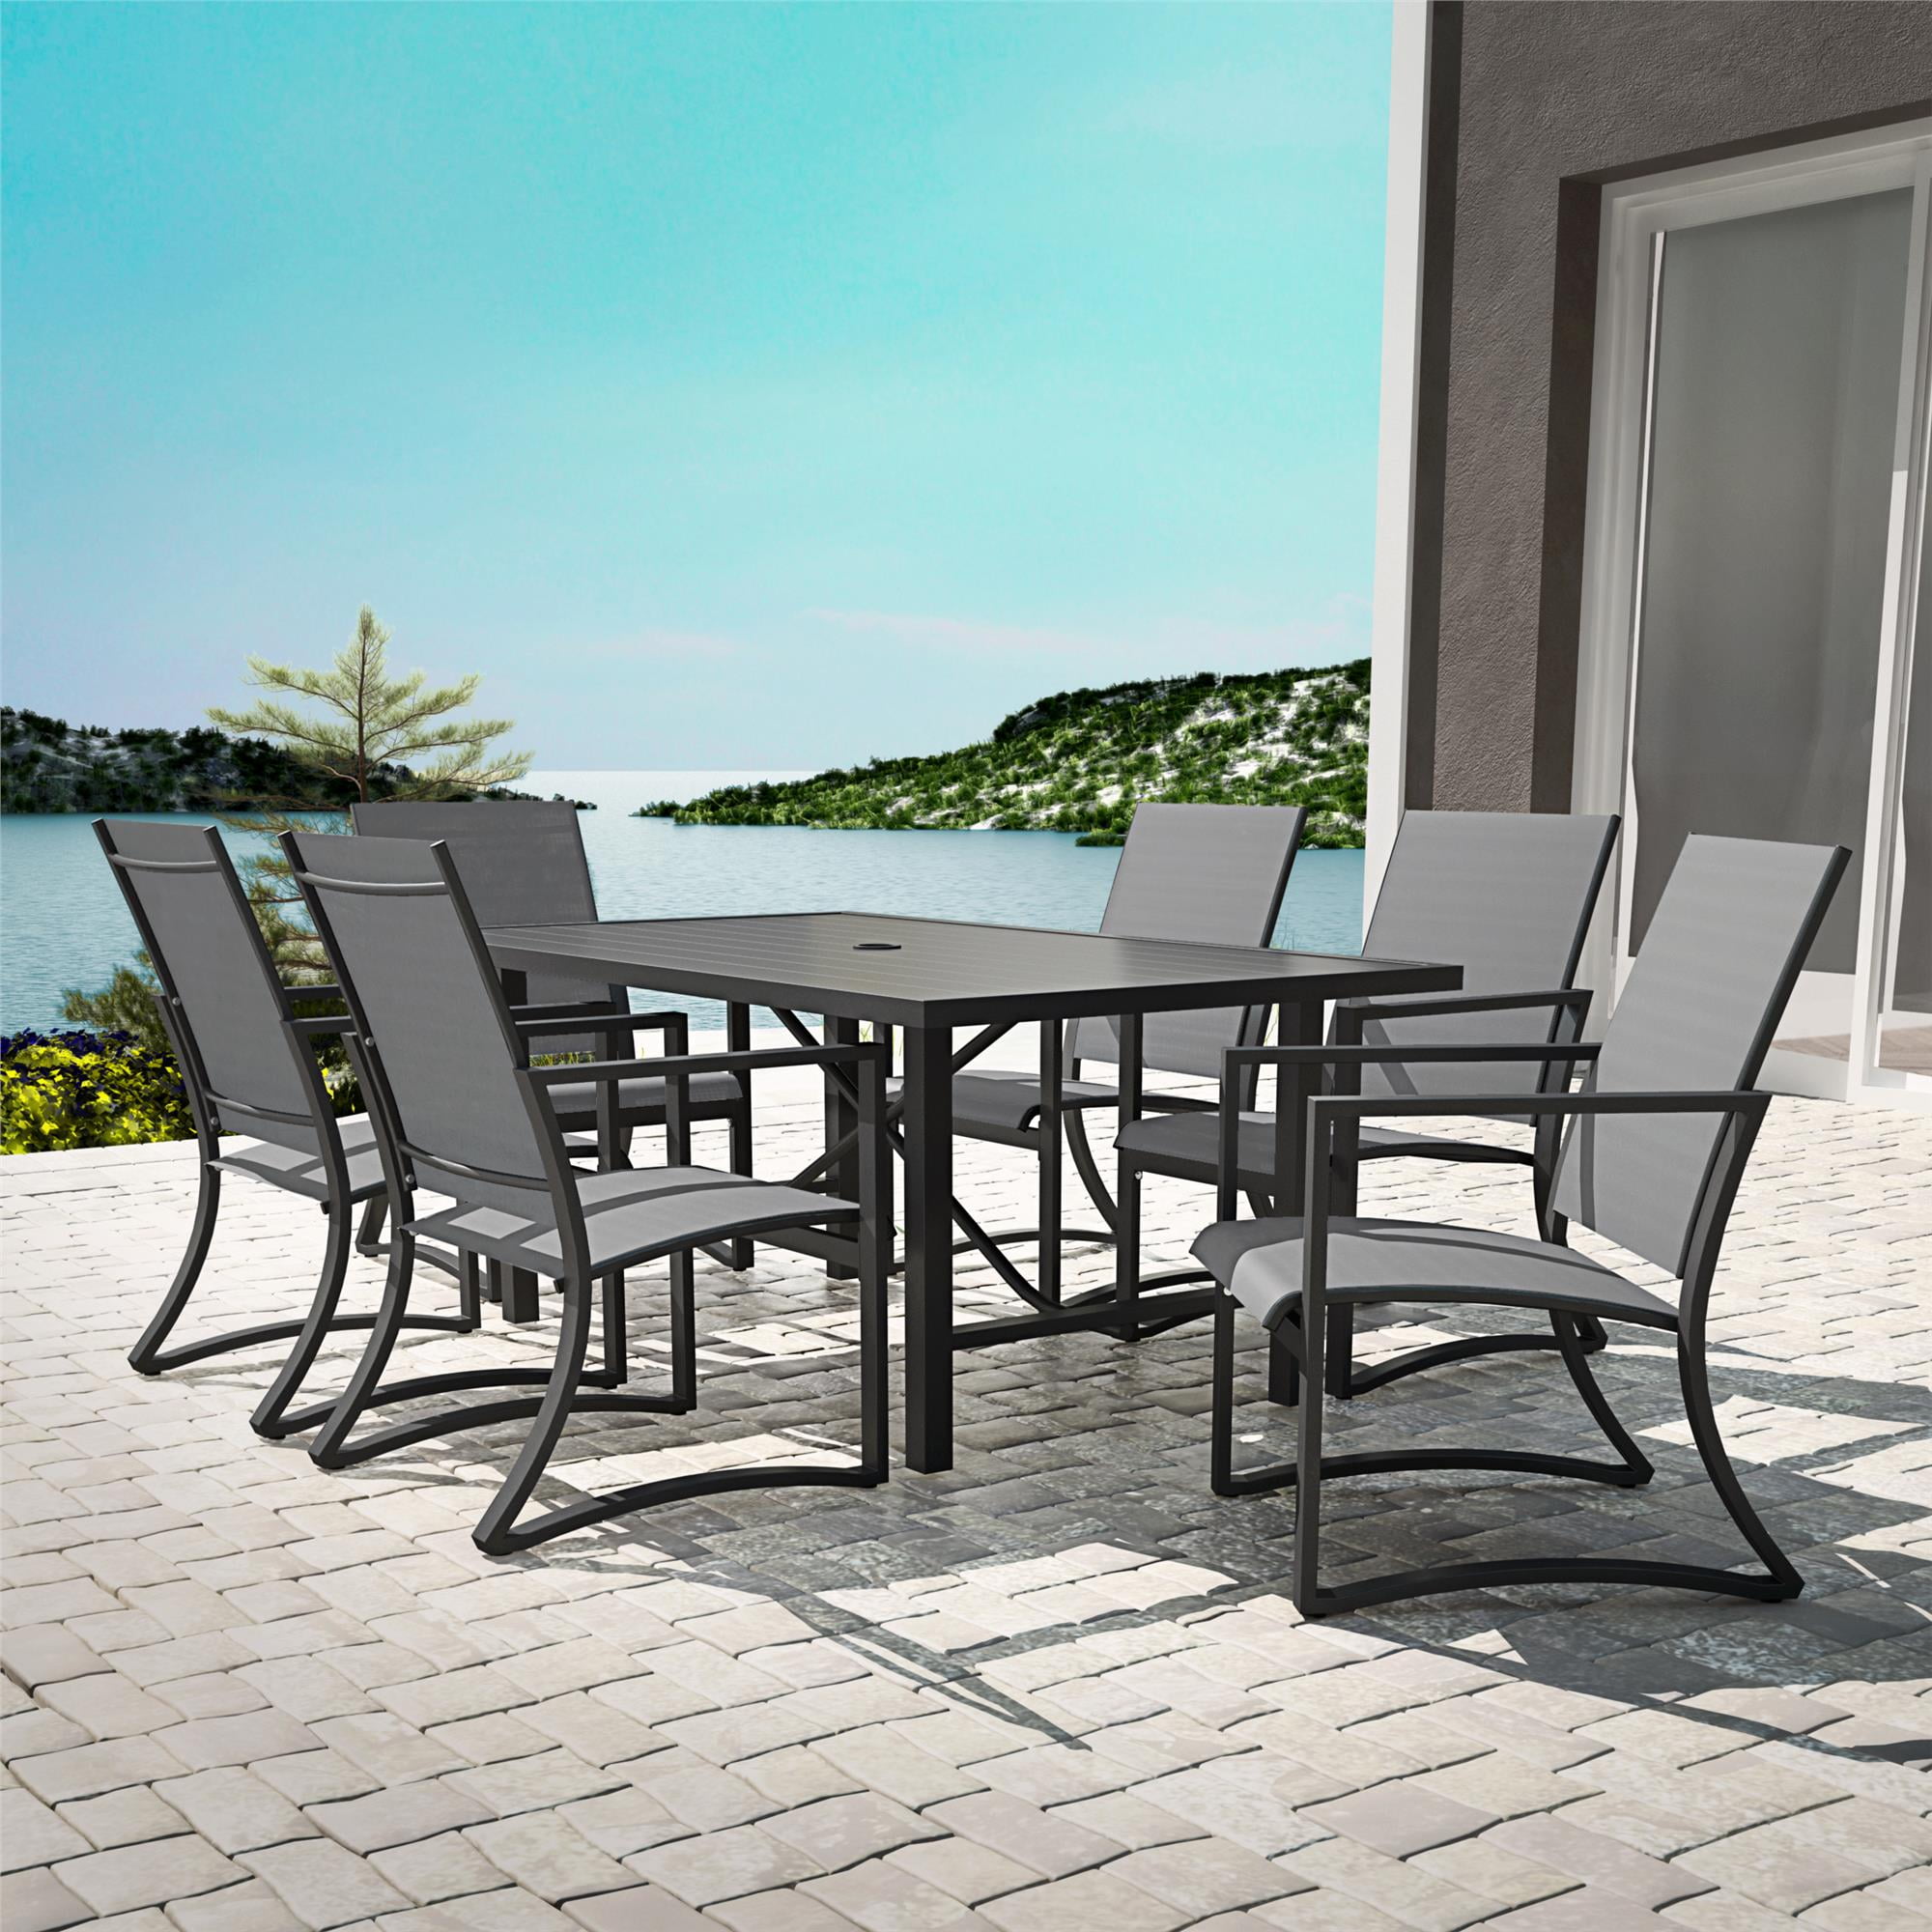 Outdoor Dining Set With Sling Chairs, Sling Chair Outdoor Dining Set